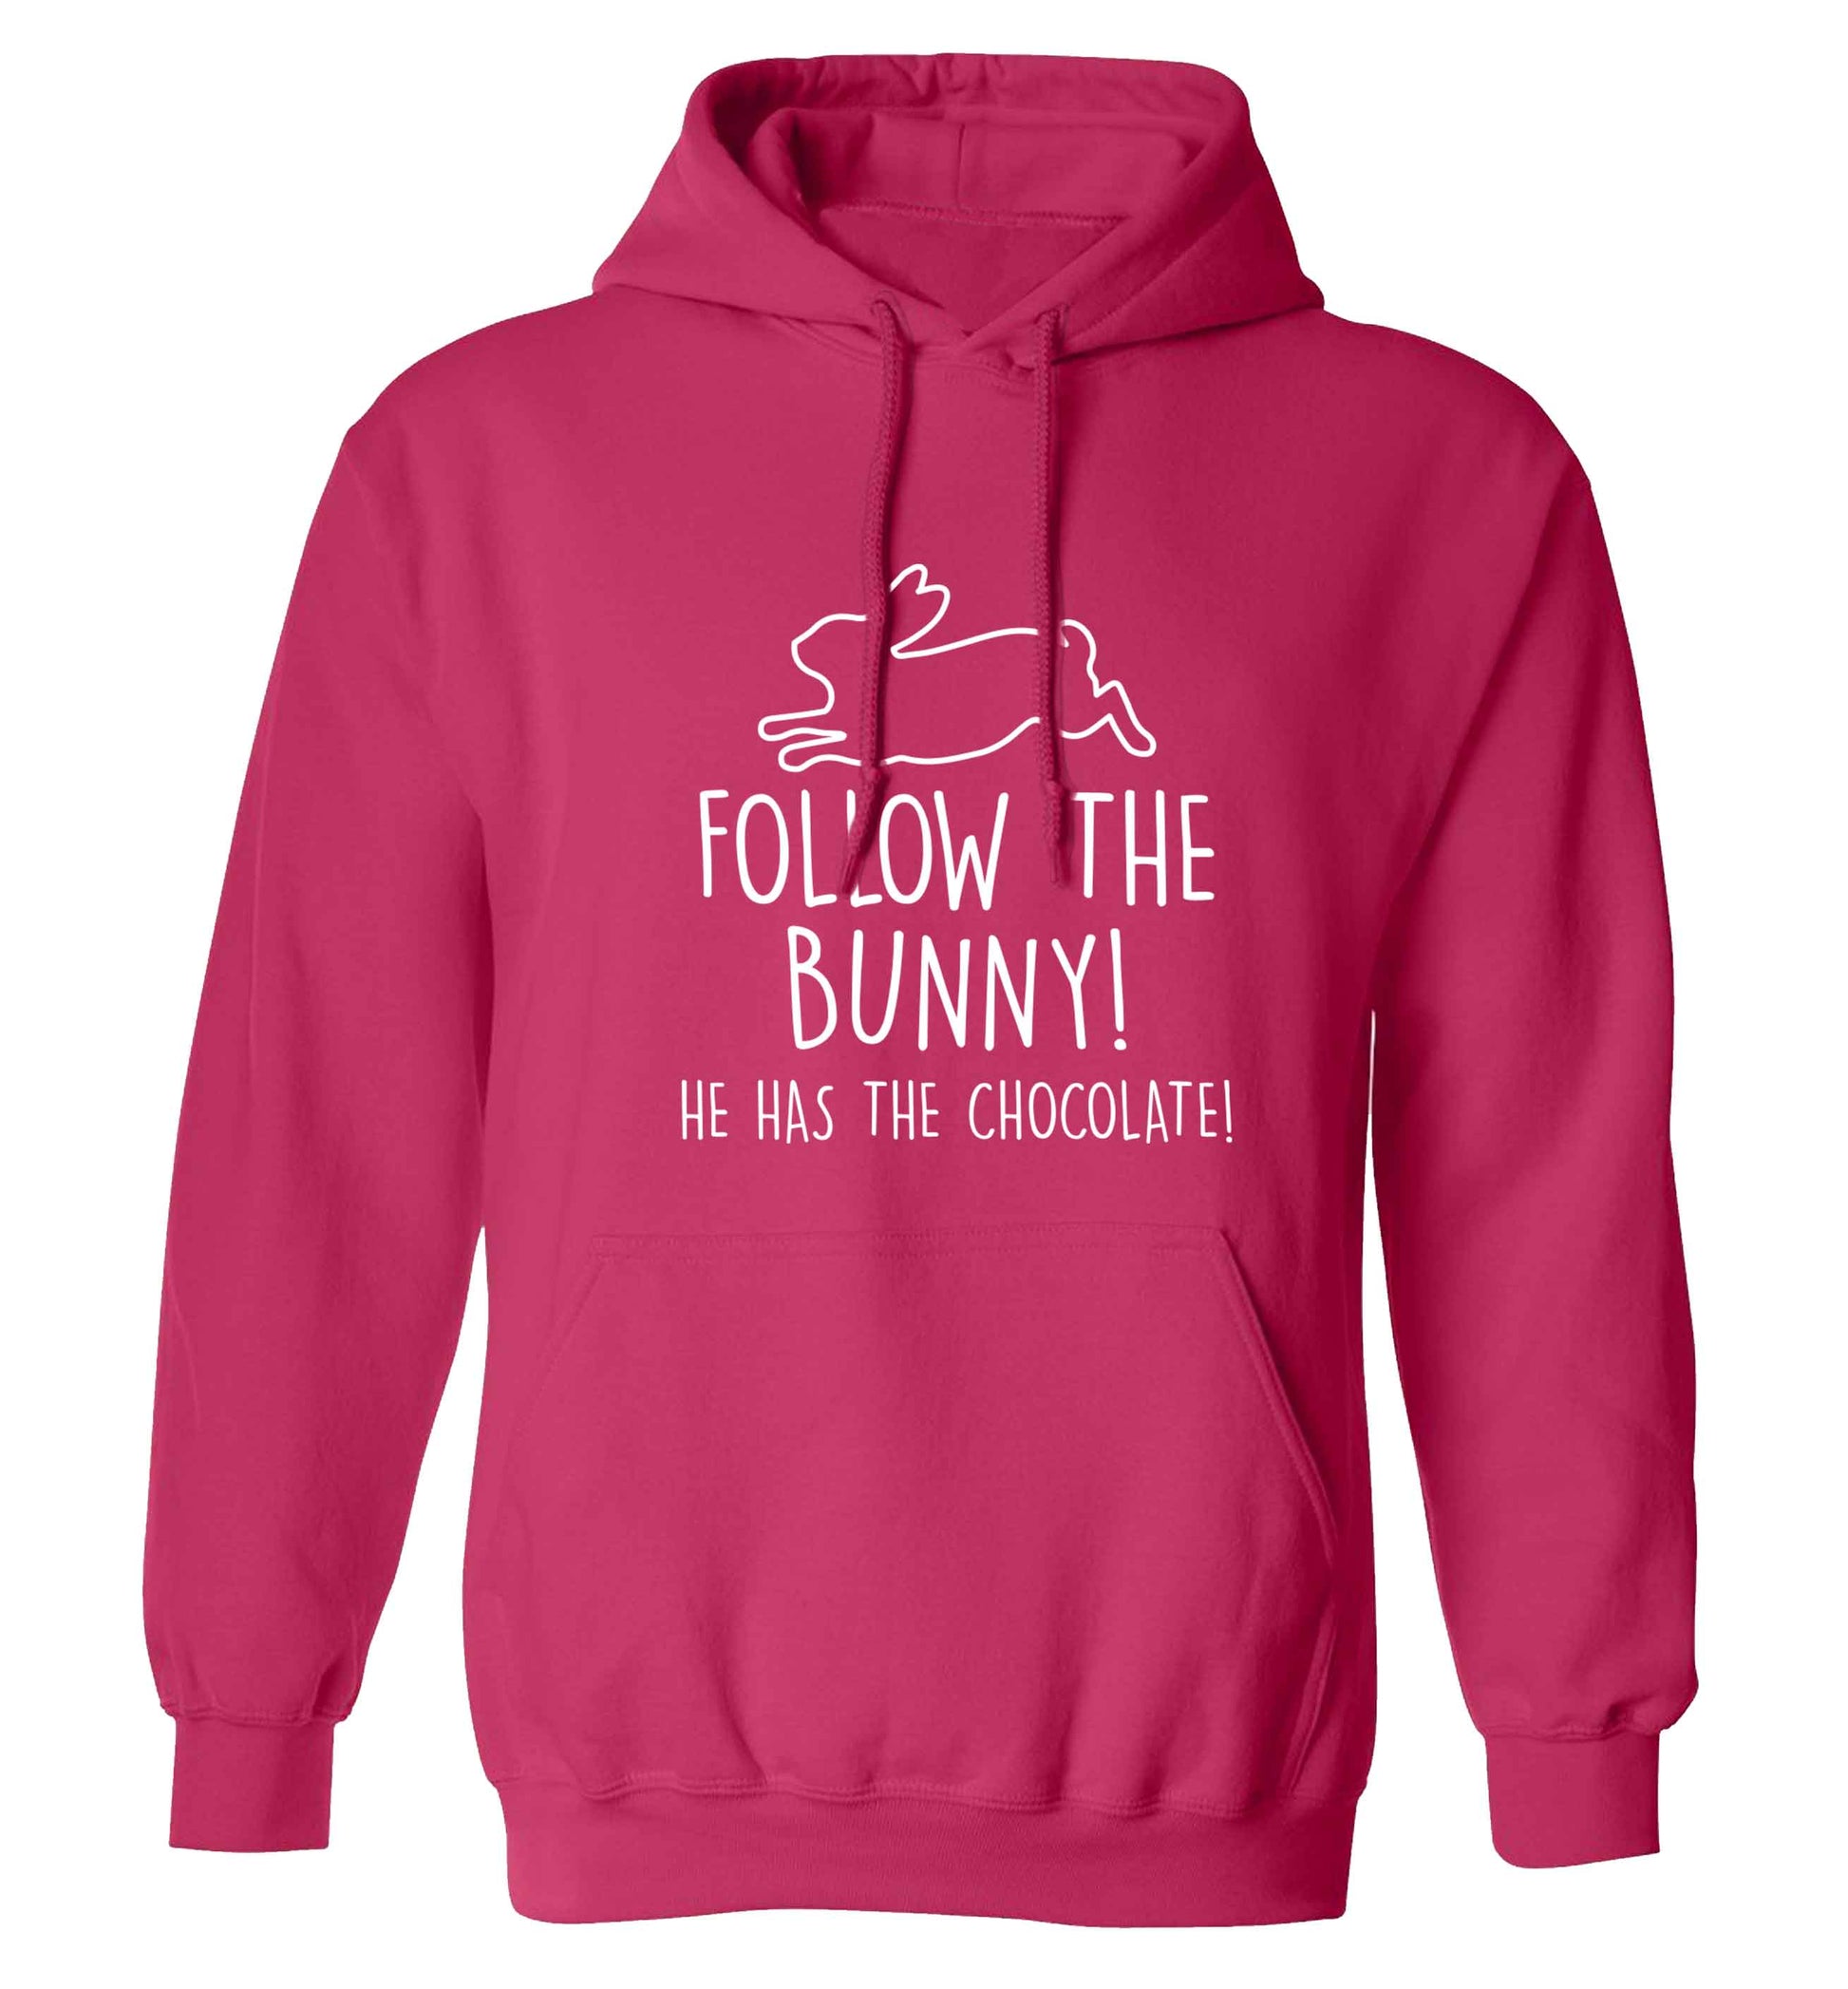 Follow the bunny! He has the chocolate adults unisex pink hoodie 2XL